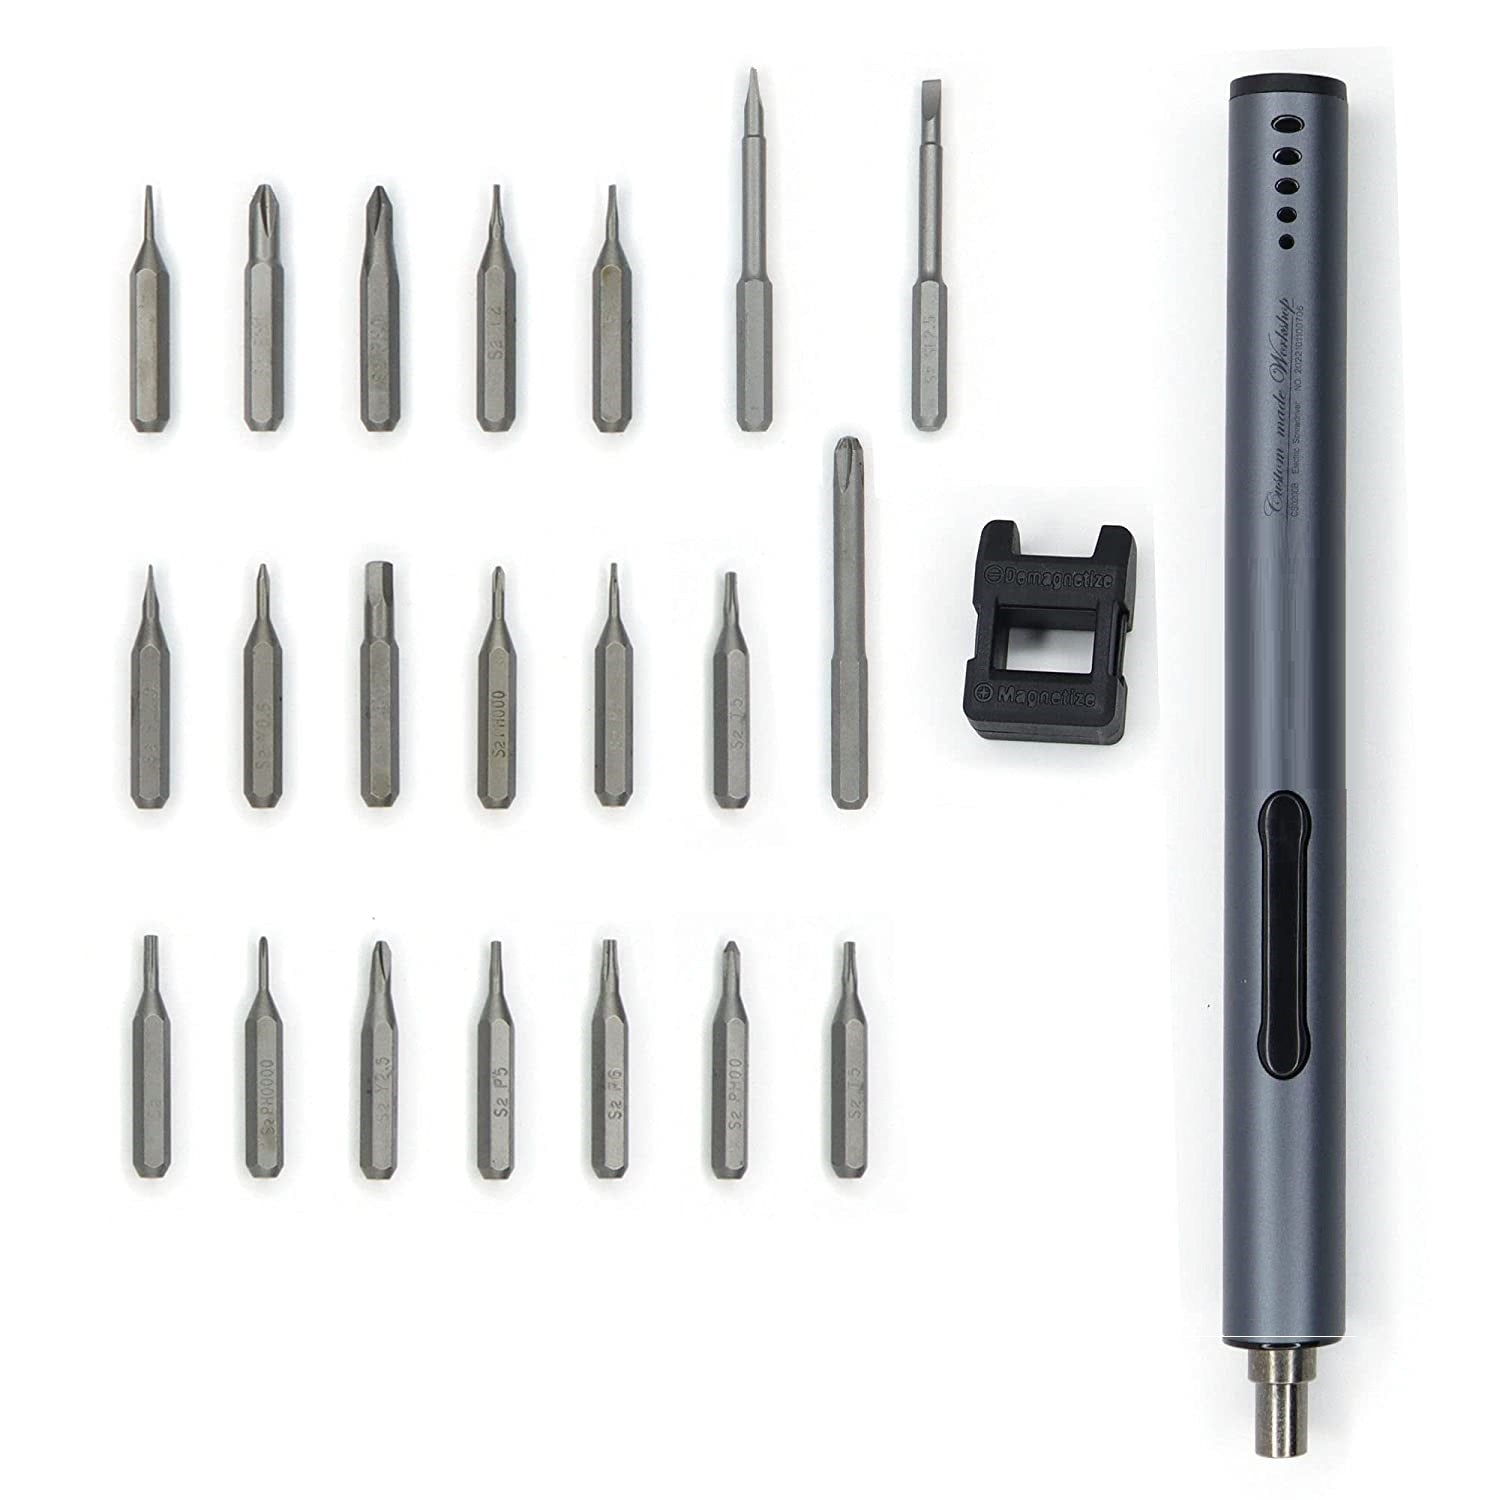 20-in-1 Rechargeable Cordless Electric Mini Screwdriver Set